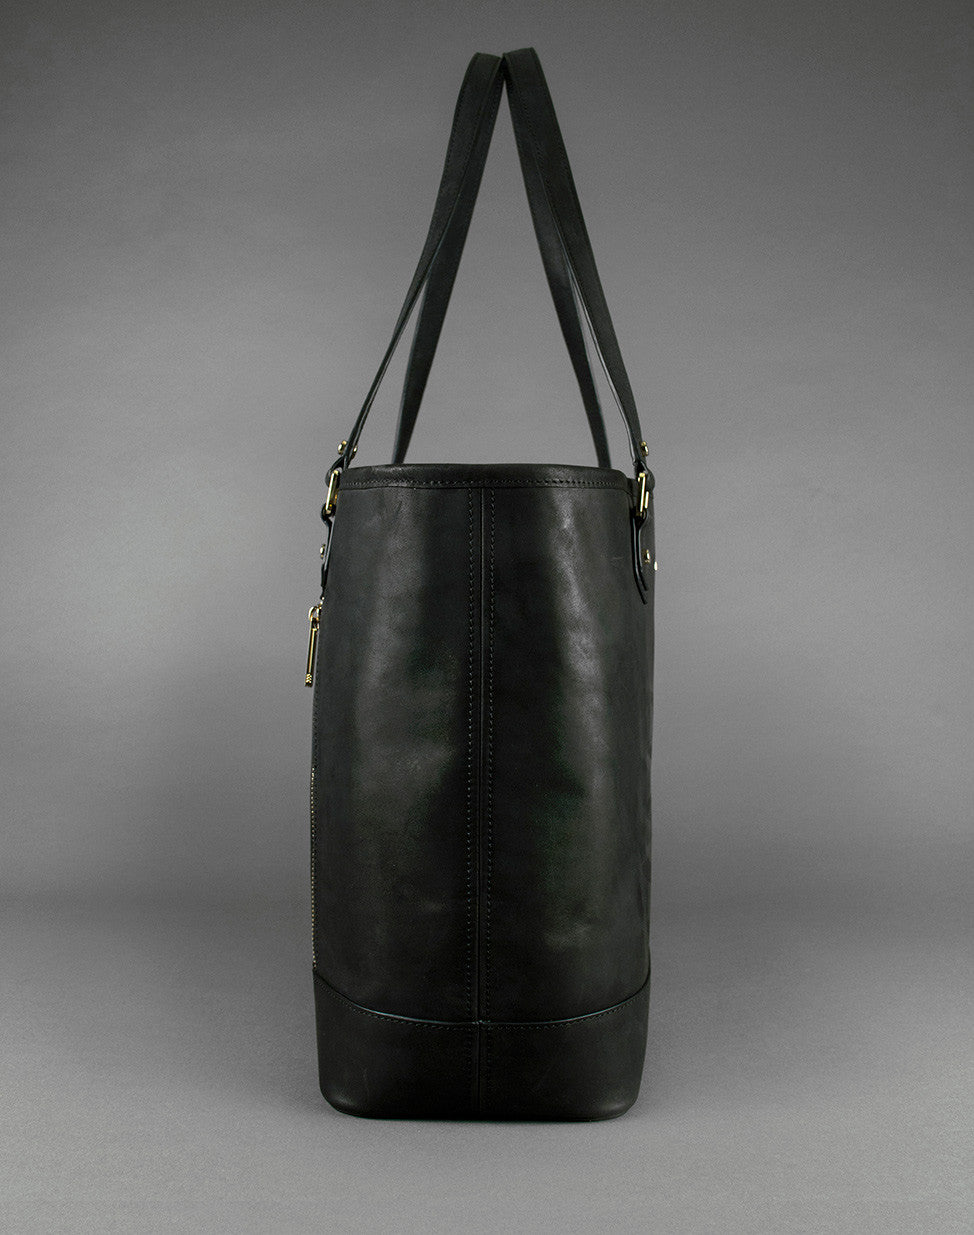 Atchison Royal Annie Tote